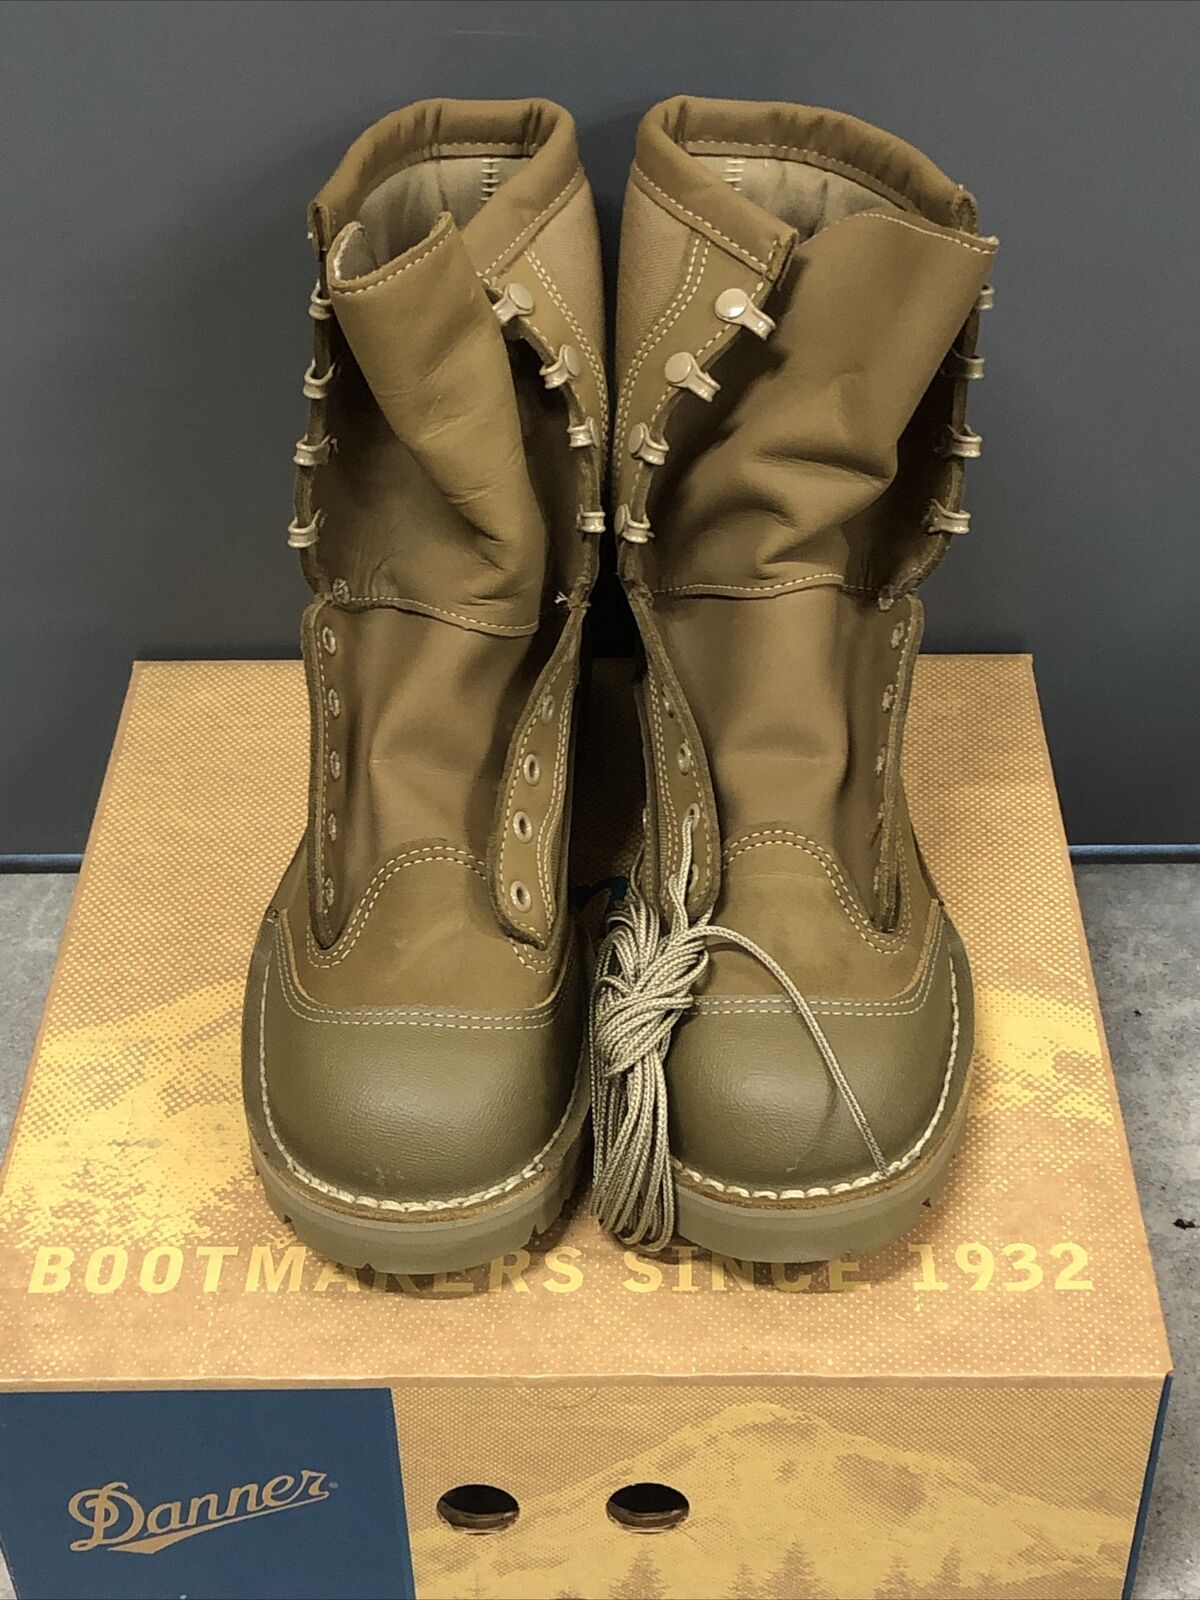 Danner Rat Boots USMC Temperate Military Boots Mojave Size 11.5 Width R